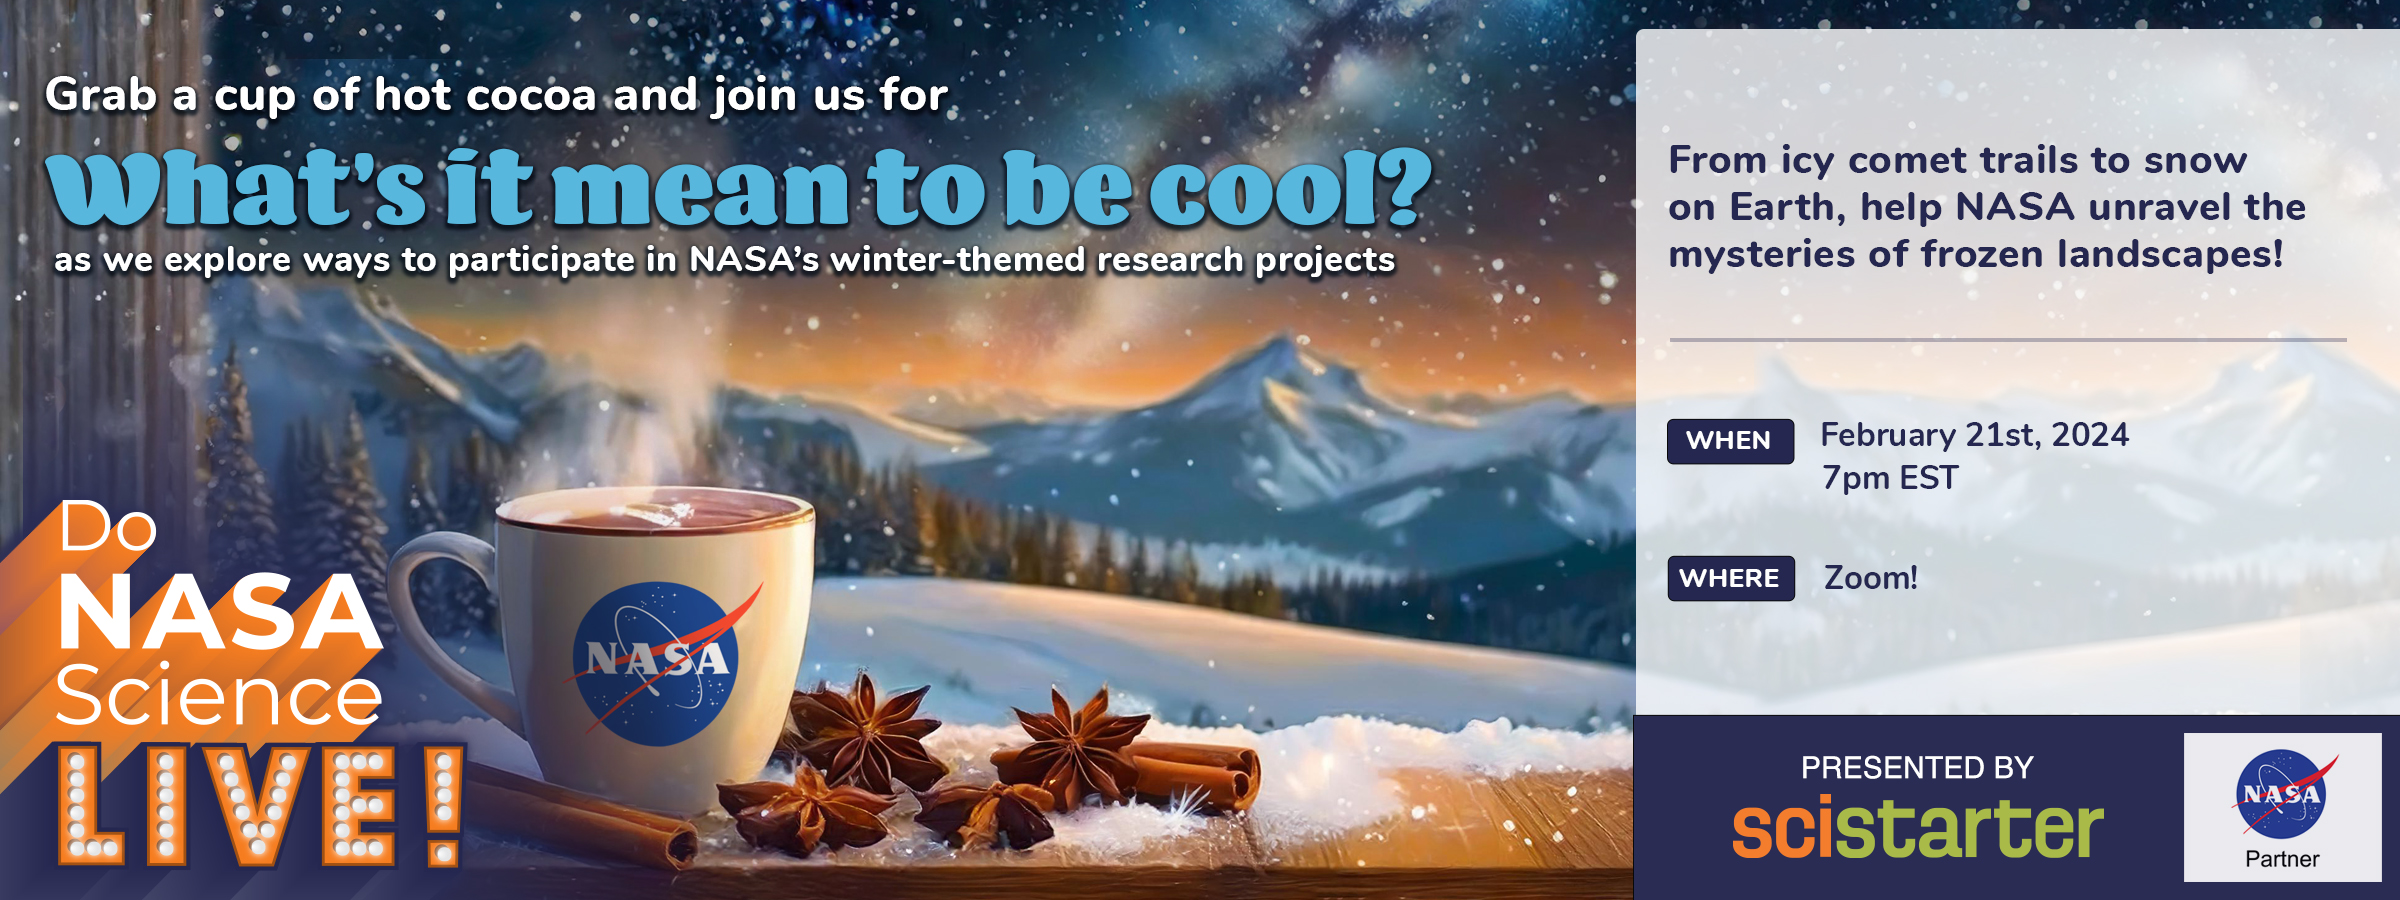 Event advertisement with a cup of cocoa in a NASA mug steaming in the foreground and a snowy mountain range in the background. Join the next Do NASA Science LIVE event as we explore ways to participate in NASA’s winter-themed volunteer research projects. Register here for this event on February 21st at 7pm ET. (credit: SciStarter)